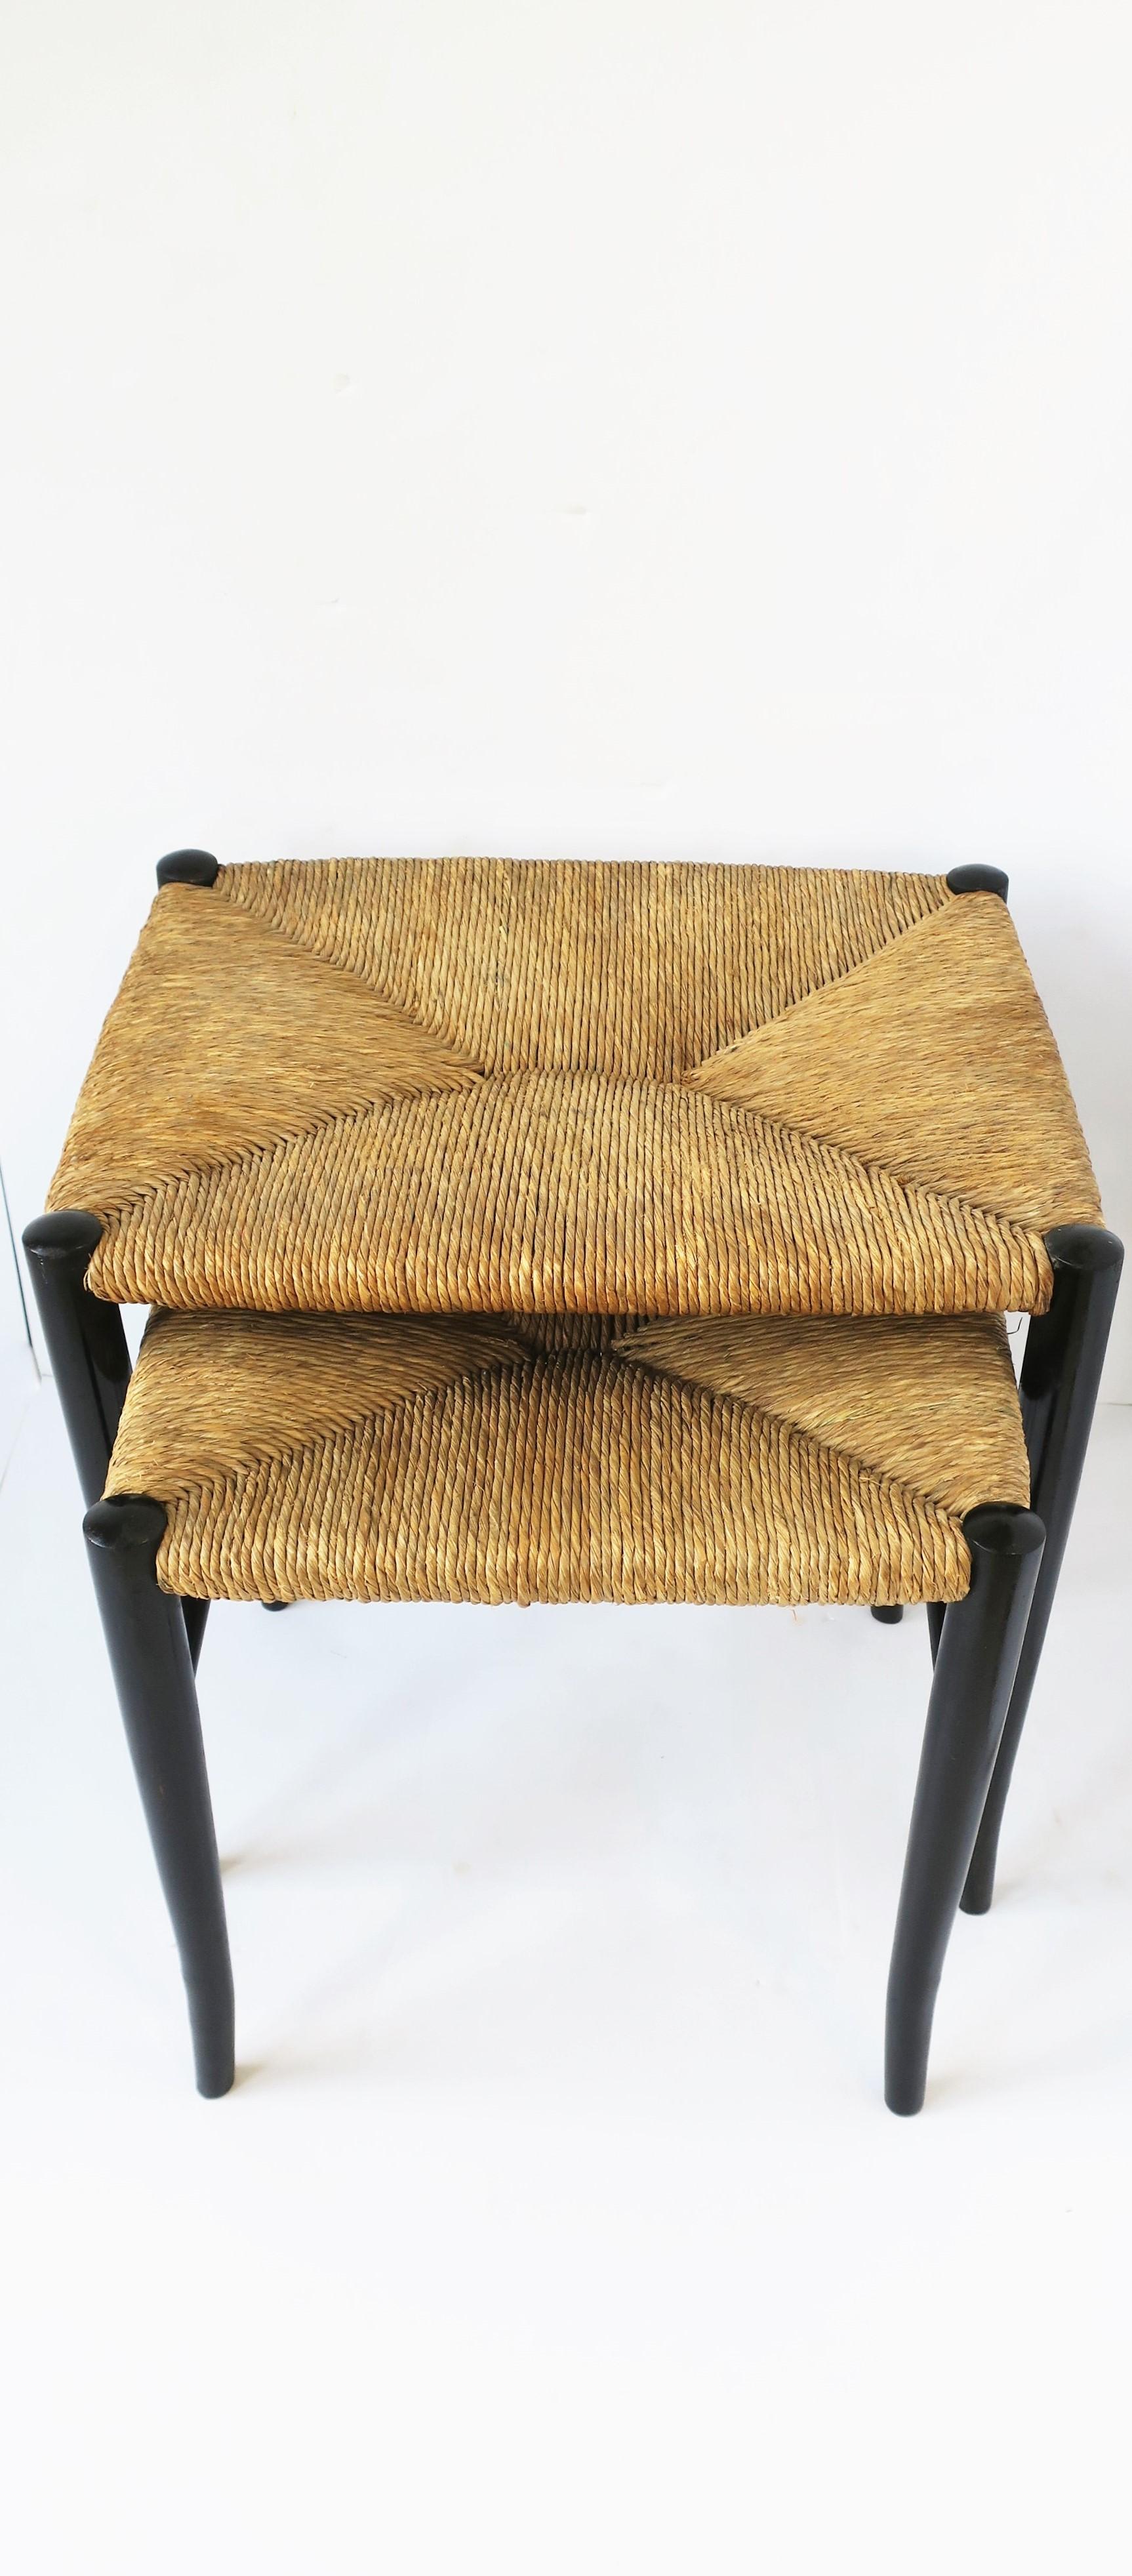 A set of Italian genuine rush seat nesting stools, in the style of Italian designer, Gio Ponti, circa mid-20th century, Italy. Seats are made of genuine rush with black ebonized wood bases. Each have paper label authentication 